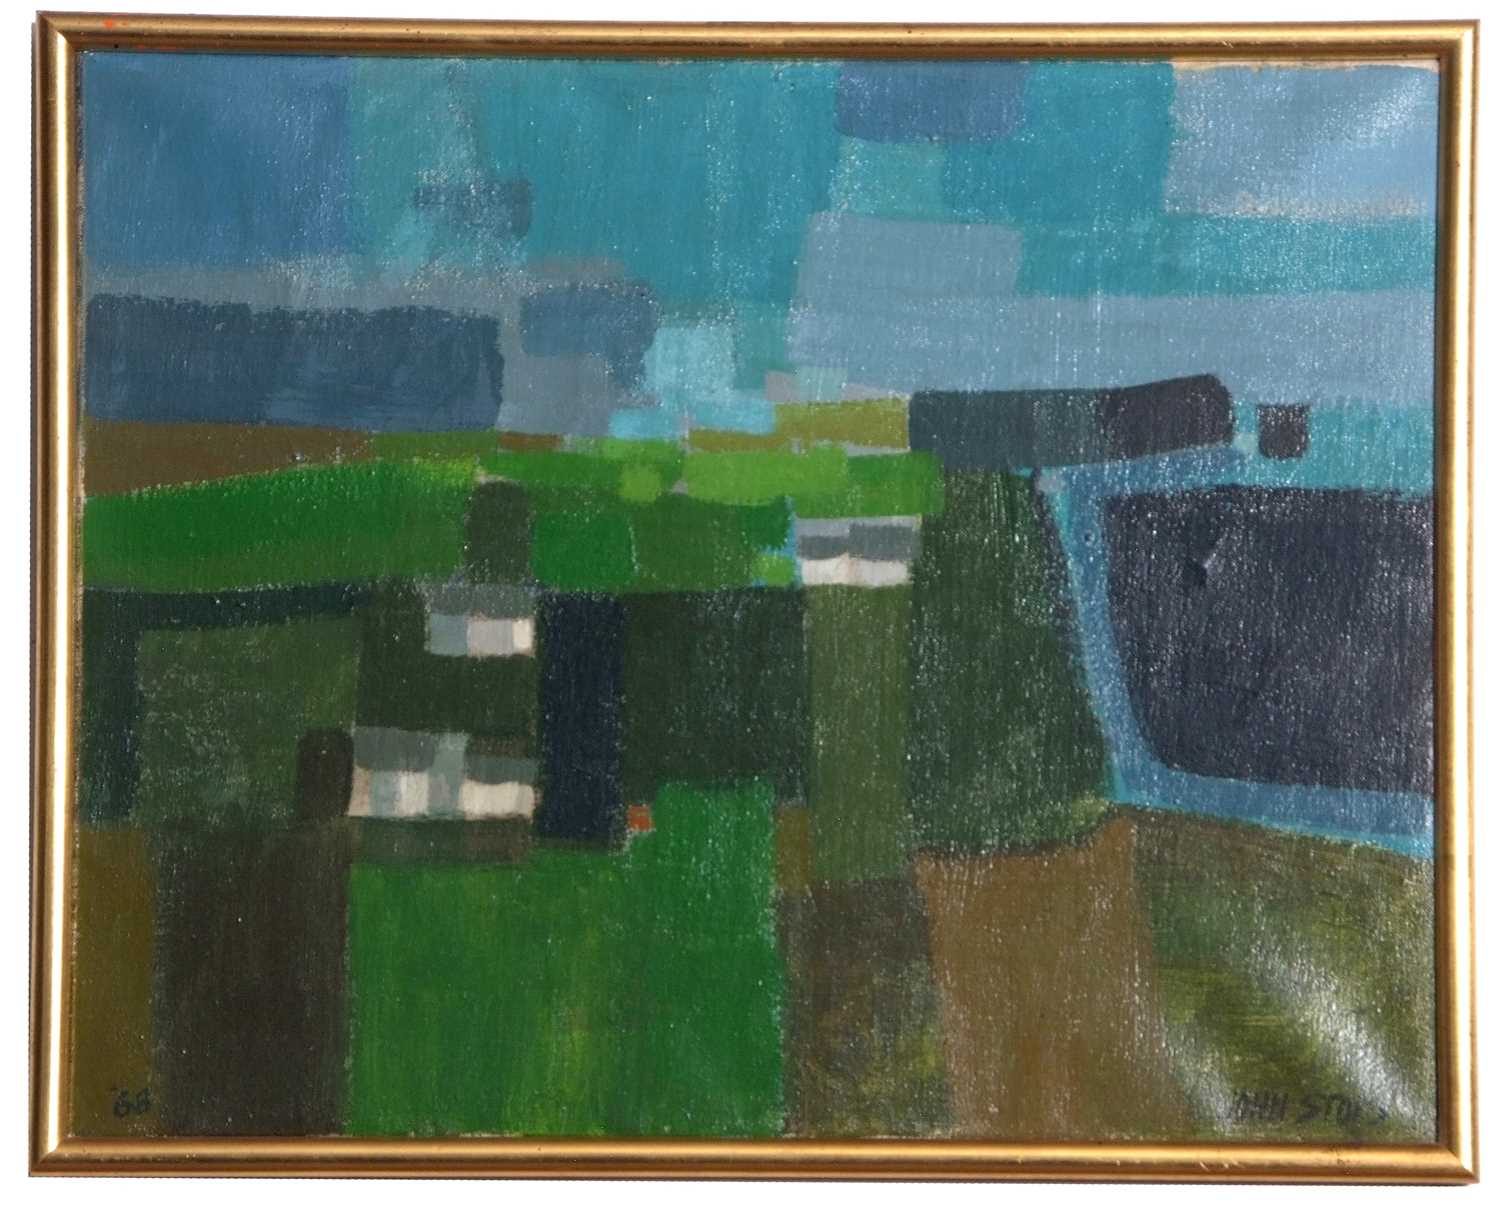 John Stops (British,1925-2002) Abstract oil on canvas, signed and dated '68, 40x50cm, framed